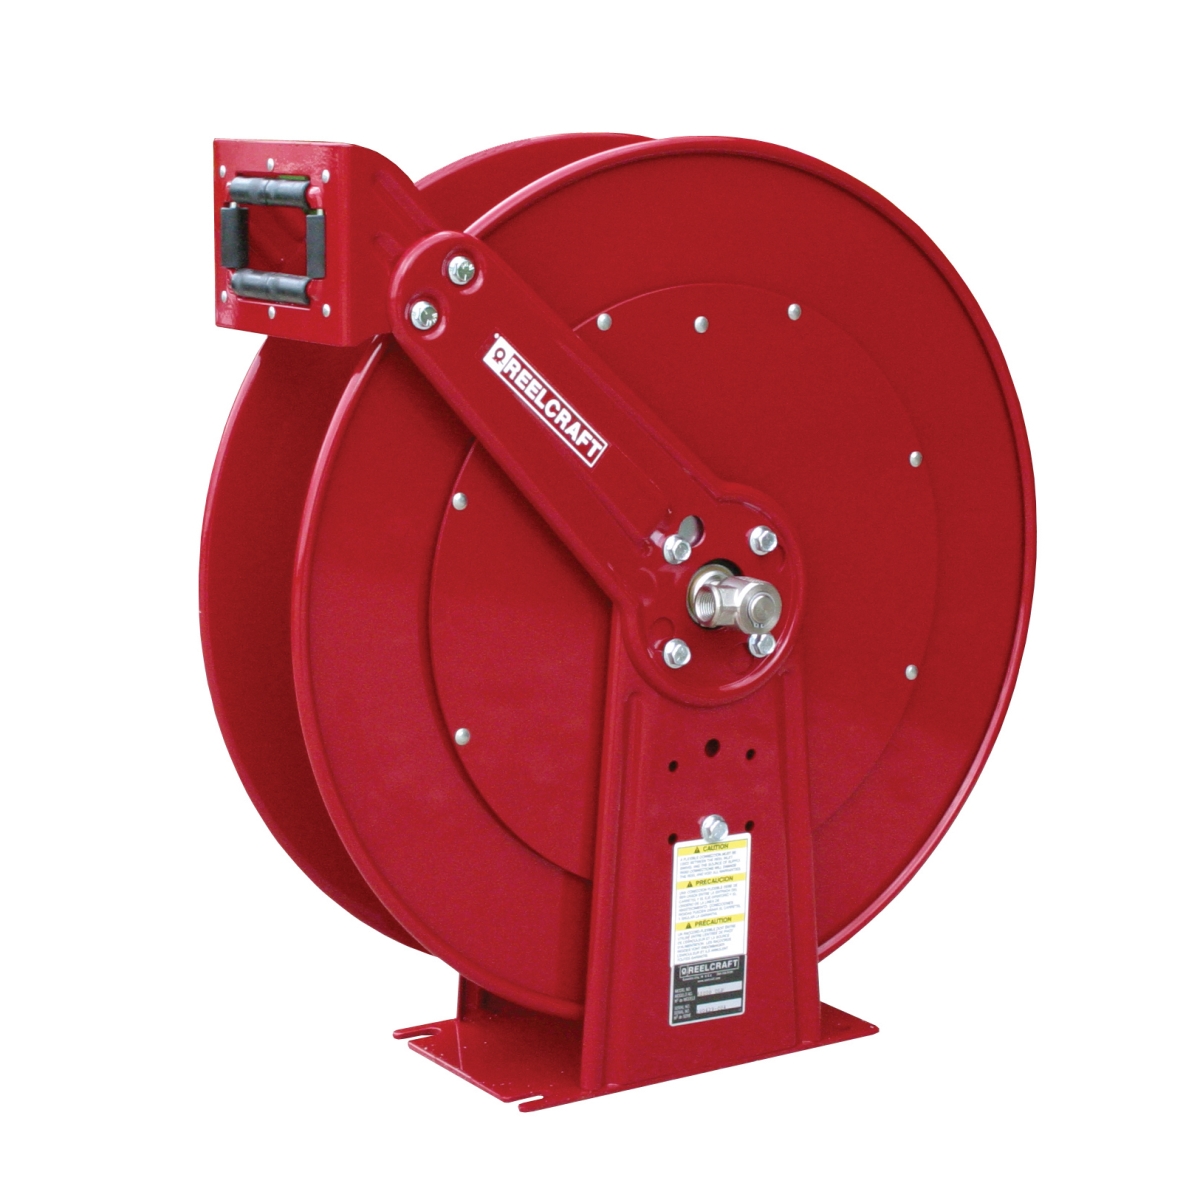 F83000 Olp 0.75 In. X 50 Ft. Heavy Duty 500 Psi Fuel Without Hose Reel, Red